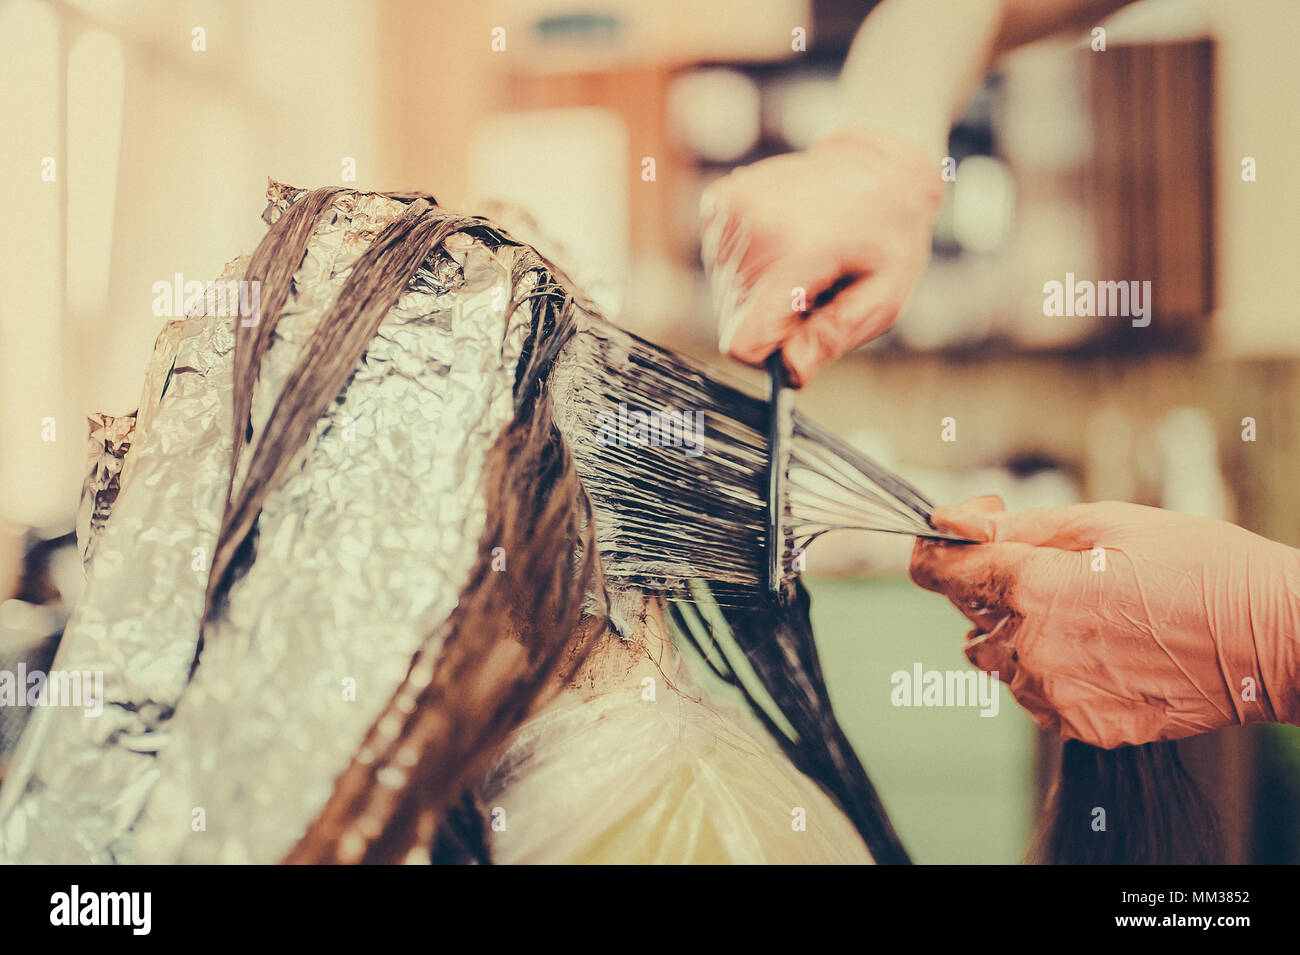 Woman in gloves is dying hair. hair dyeing. Toned image. Hair in foil. combs her hair Stock Photo